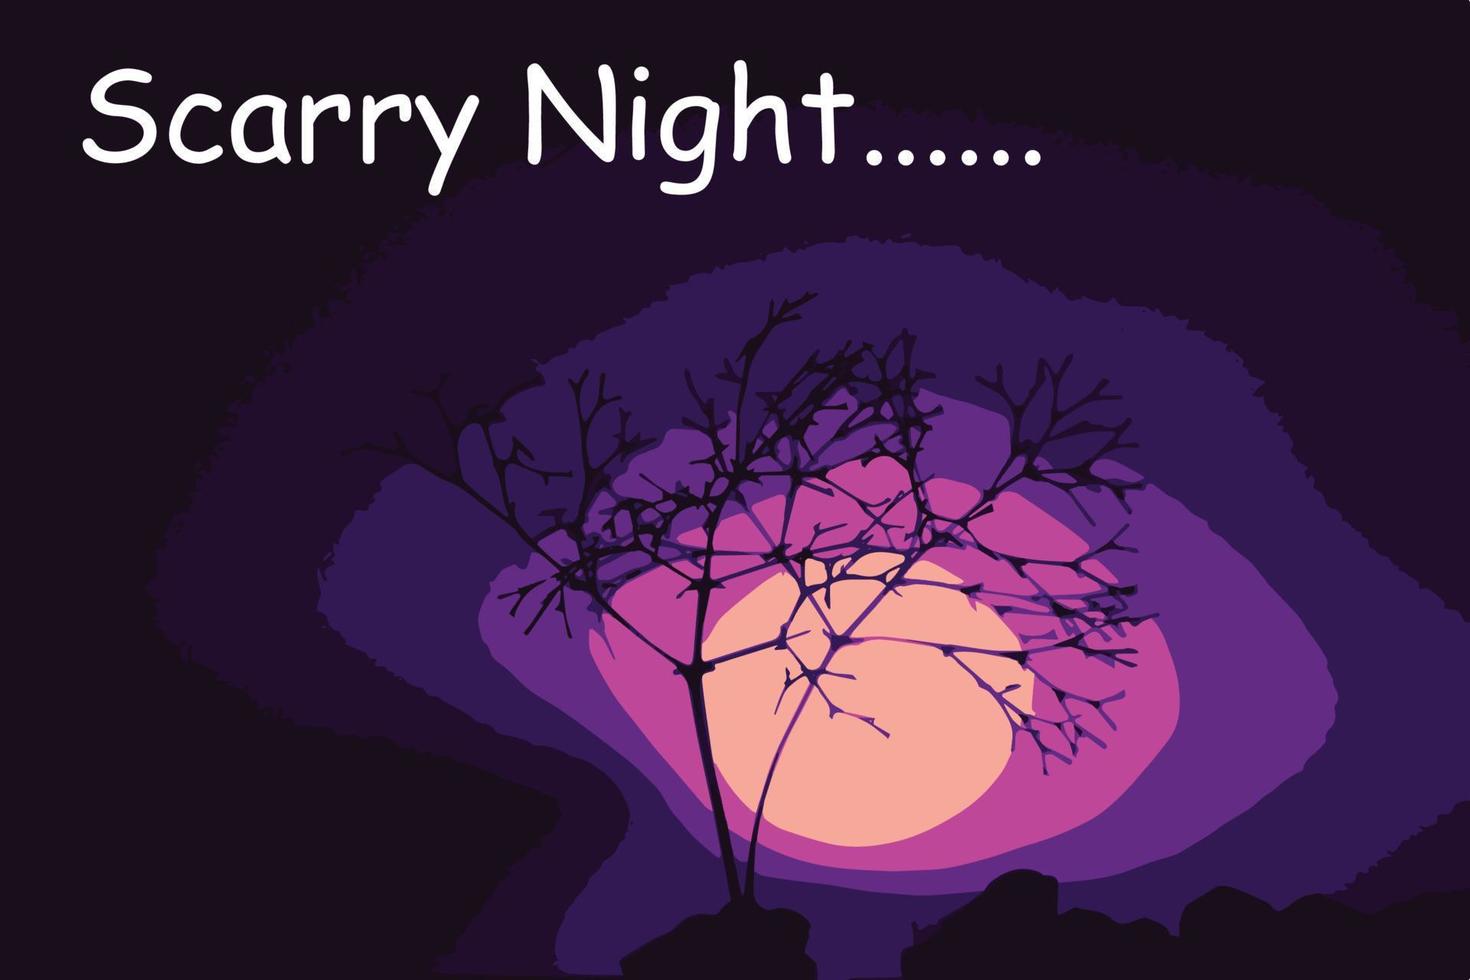 Scary Nigh, Scary tree illustration, scary purple theme night vector